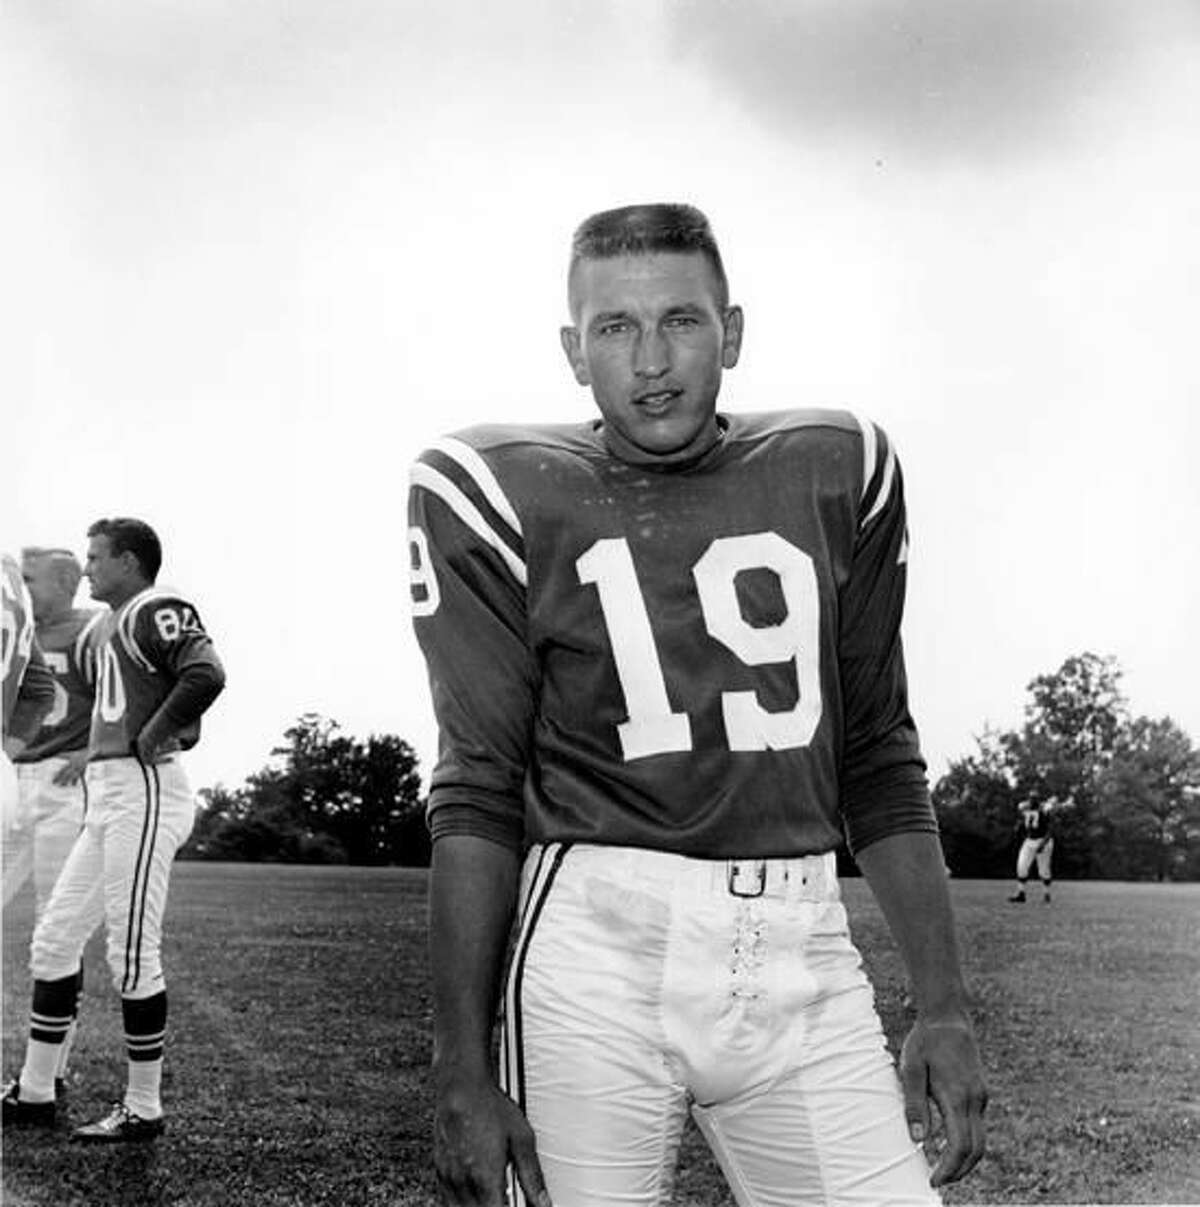 Quarterback Johnny Unitas of the Baltimore Colts poses for a photo on July 19, 1961. (Associated Press file photo)